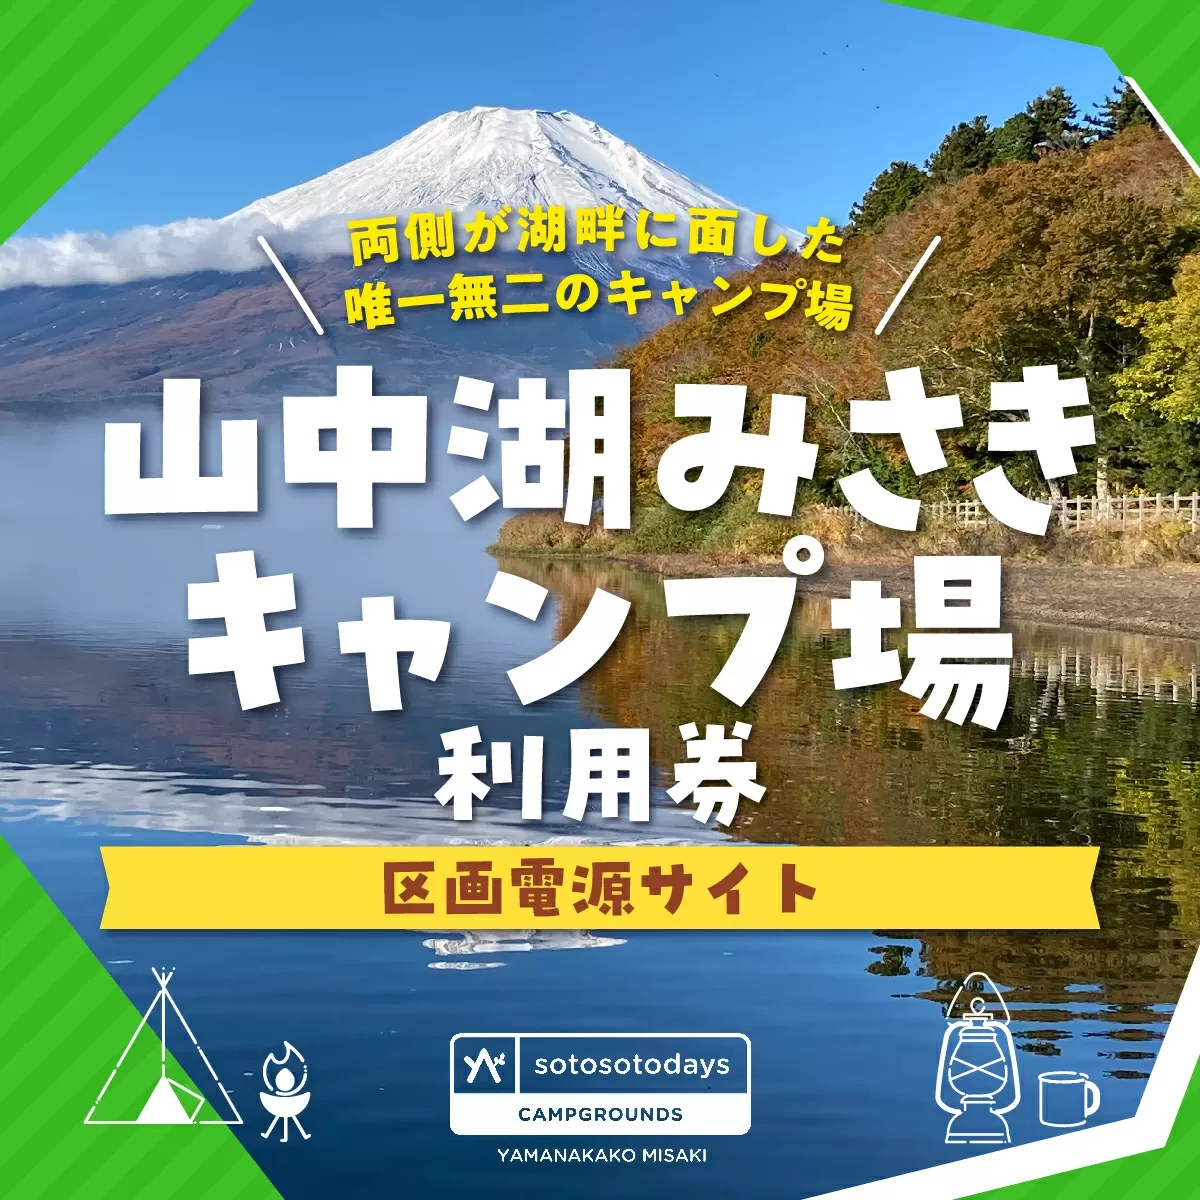 sotosotodays CAMPGROUNDS 山中湖みさき（区画電源サイト） ふるさと納税 キャンプ キャンプ場 フリー 区画 電源サイト ソロキャンプ 山梨県 山中湖 送料無料 YAE002